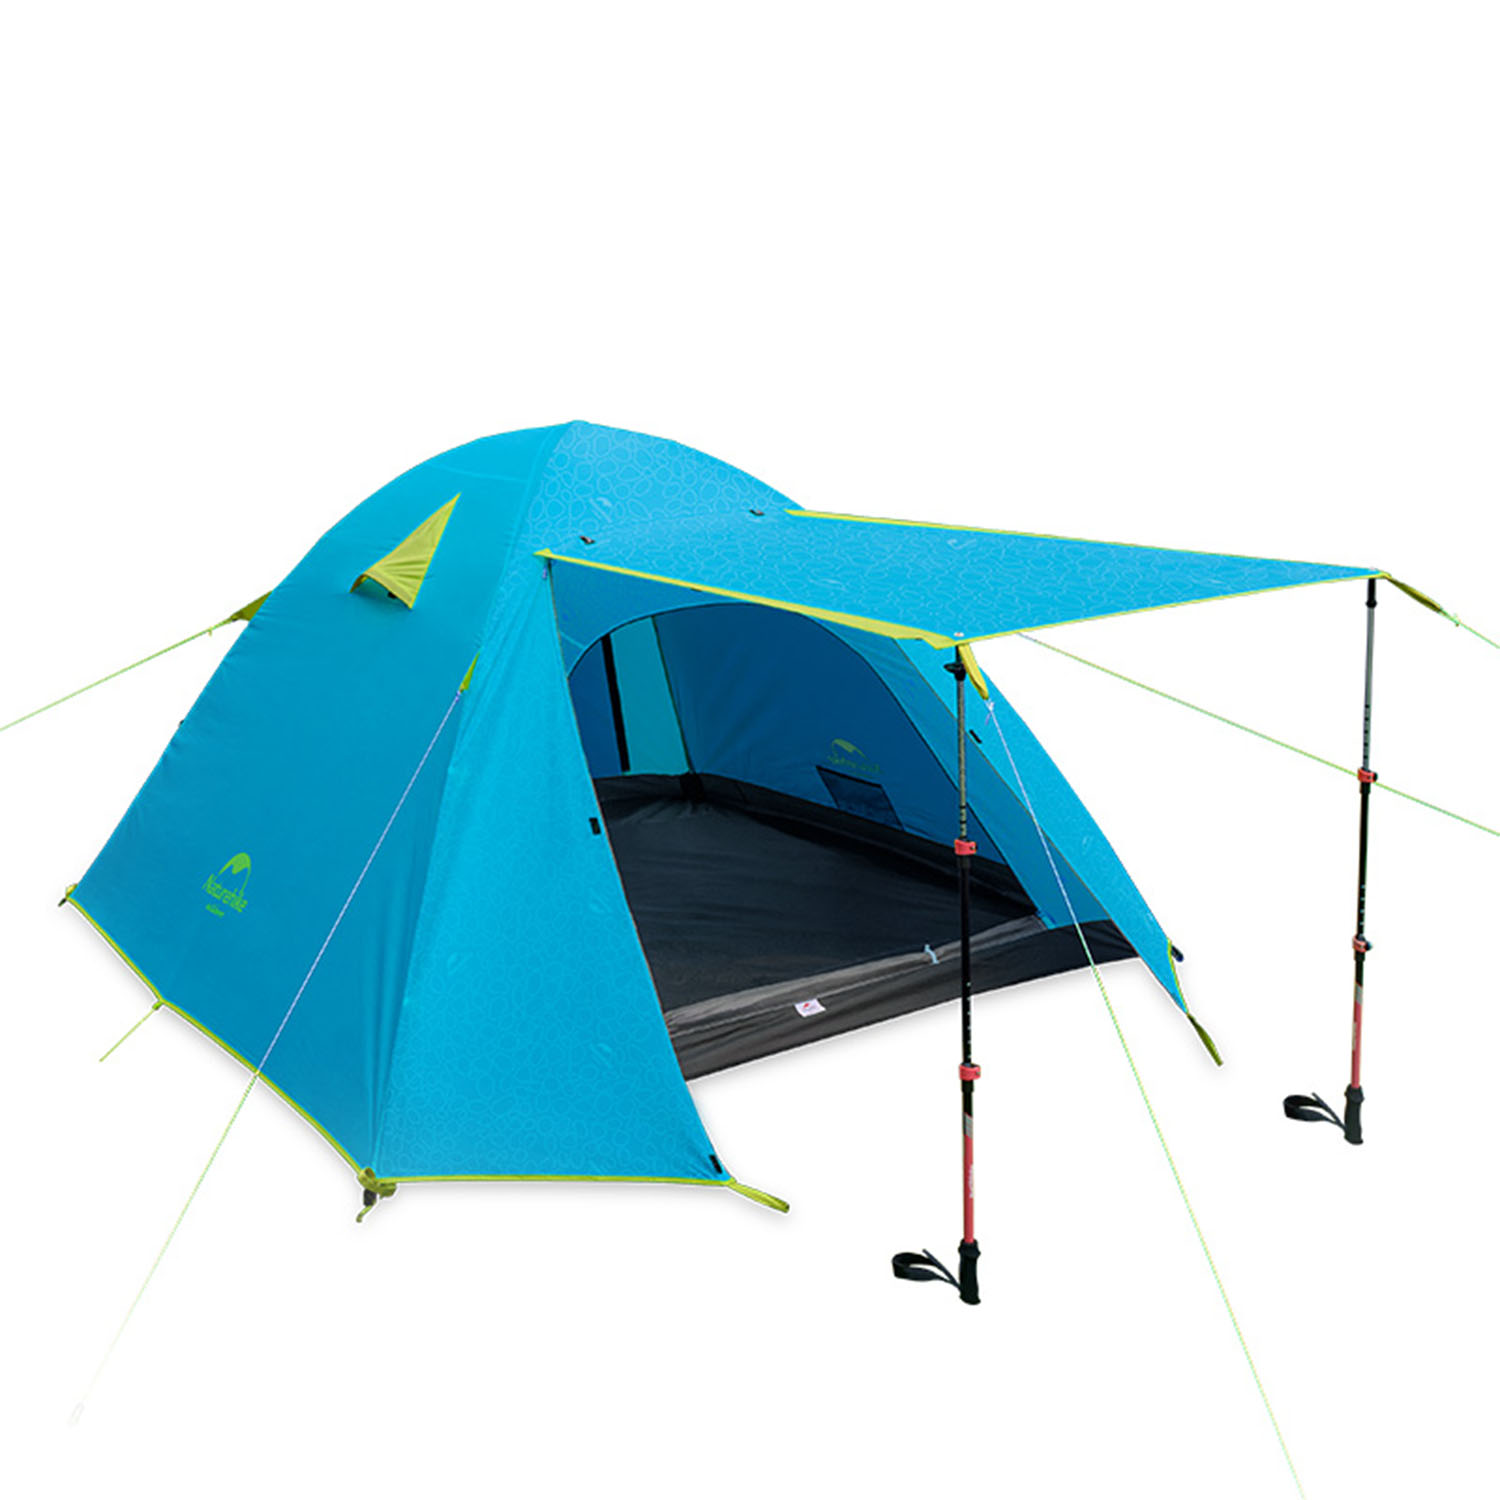 Палатка Naturehike P-Series Aluminum Pole Tent With New Material 210T65D Embossed Design 2 man Sea Blue